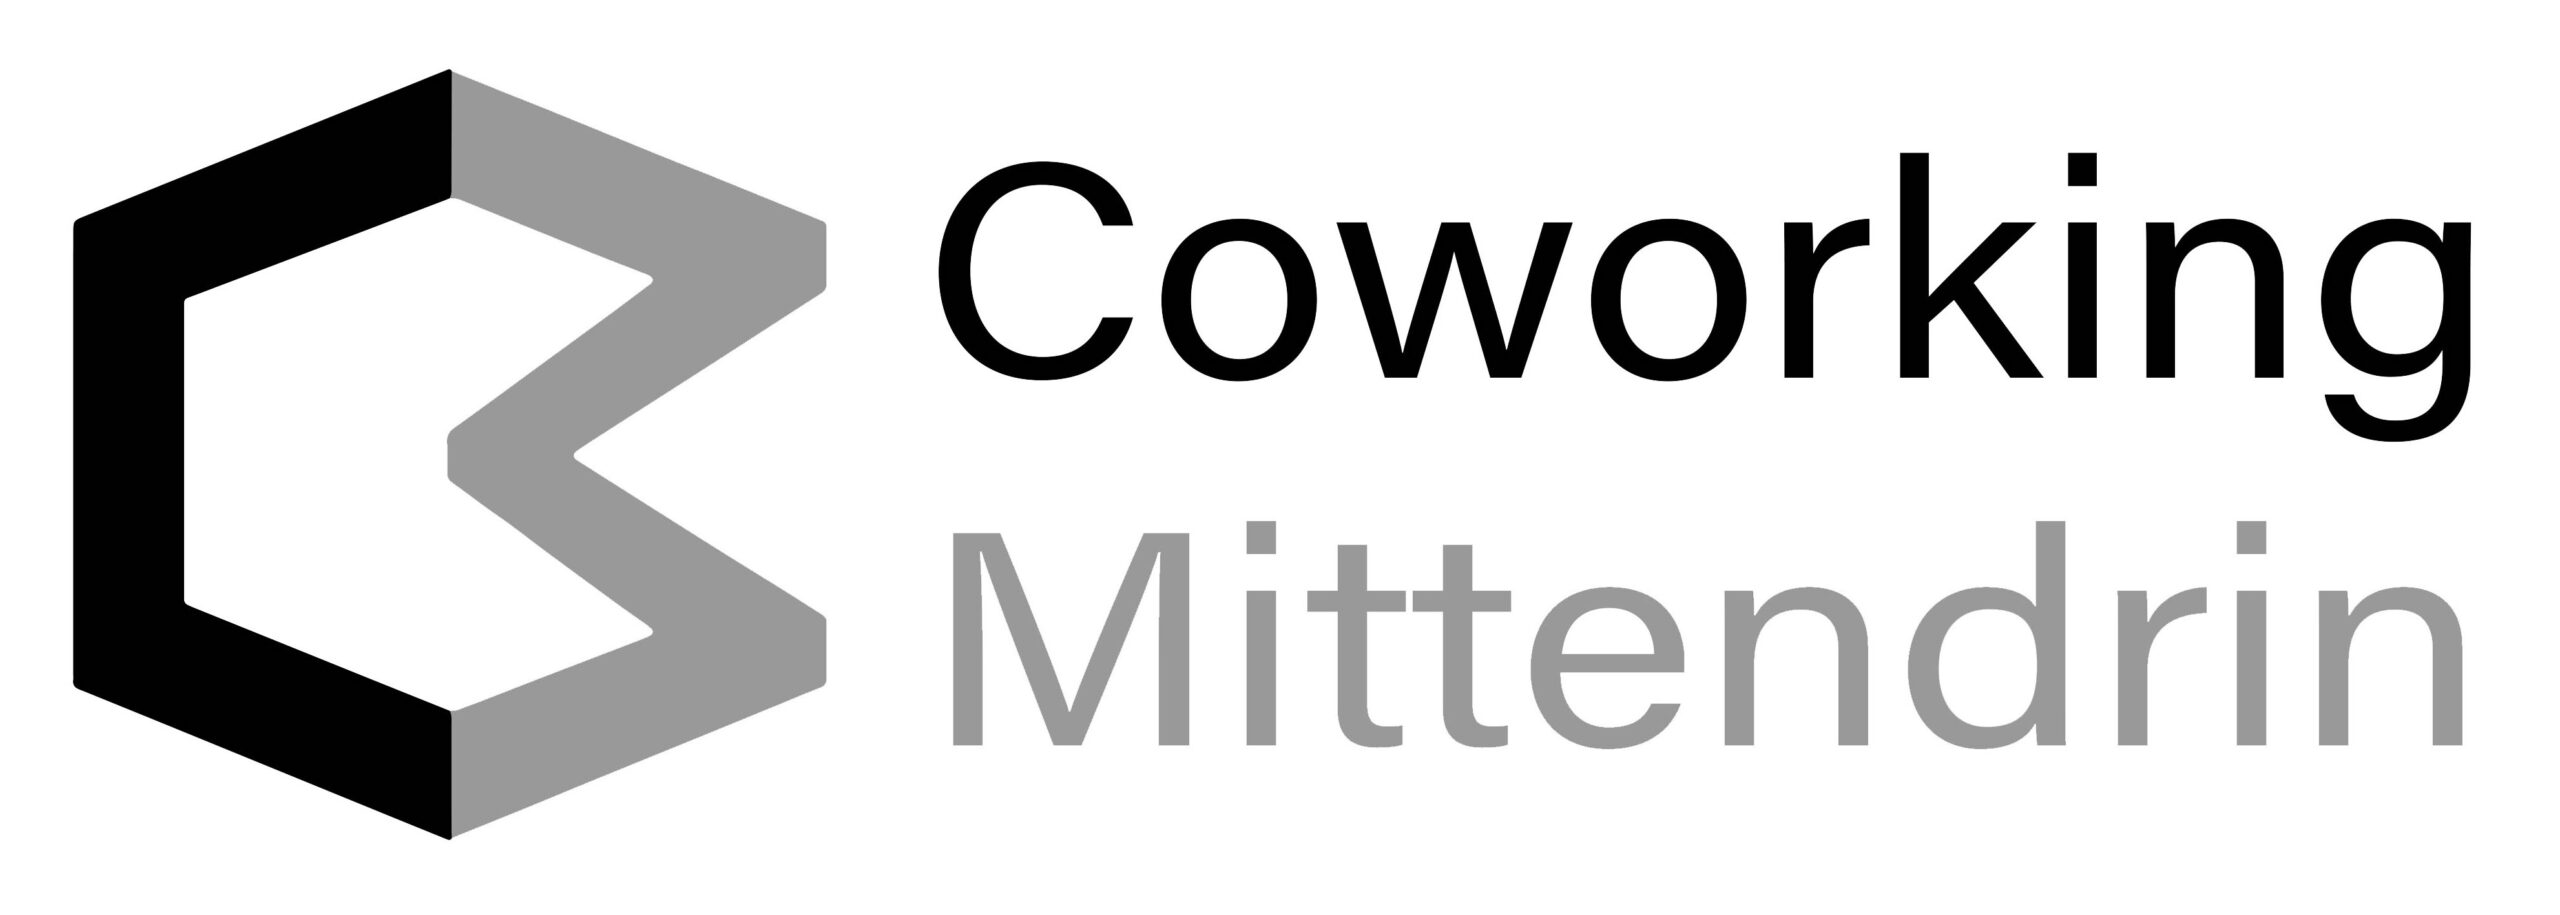 Coworking Mittendrin